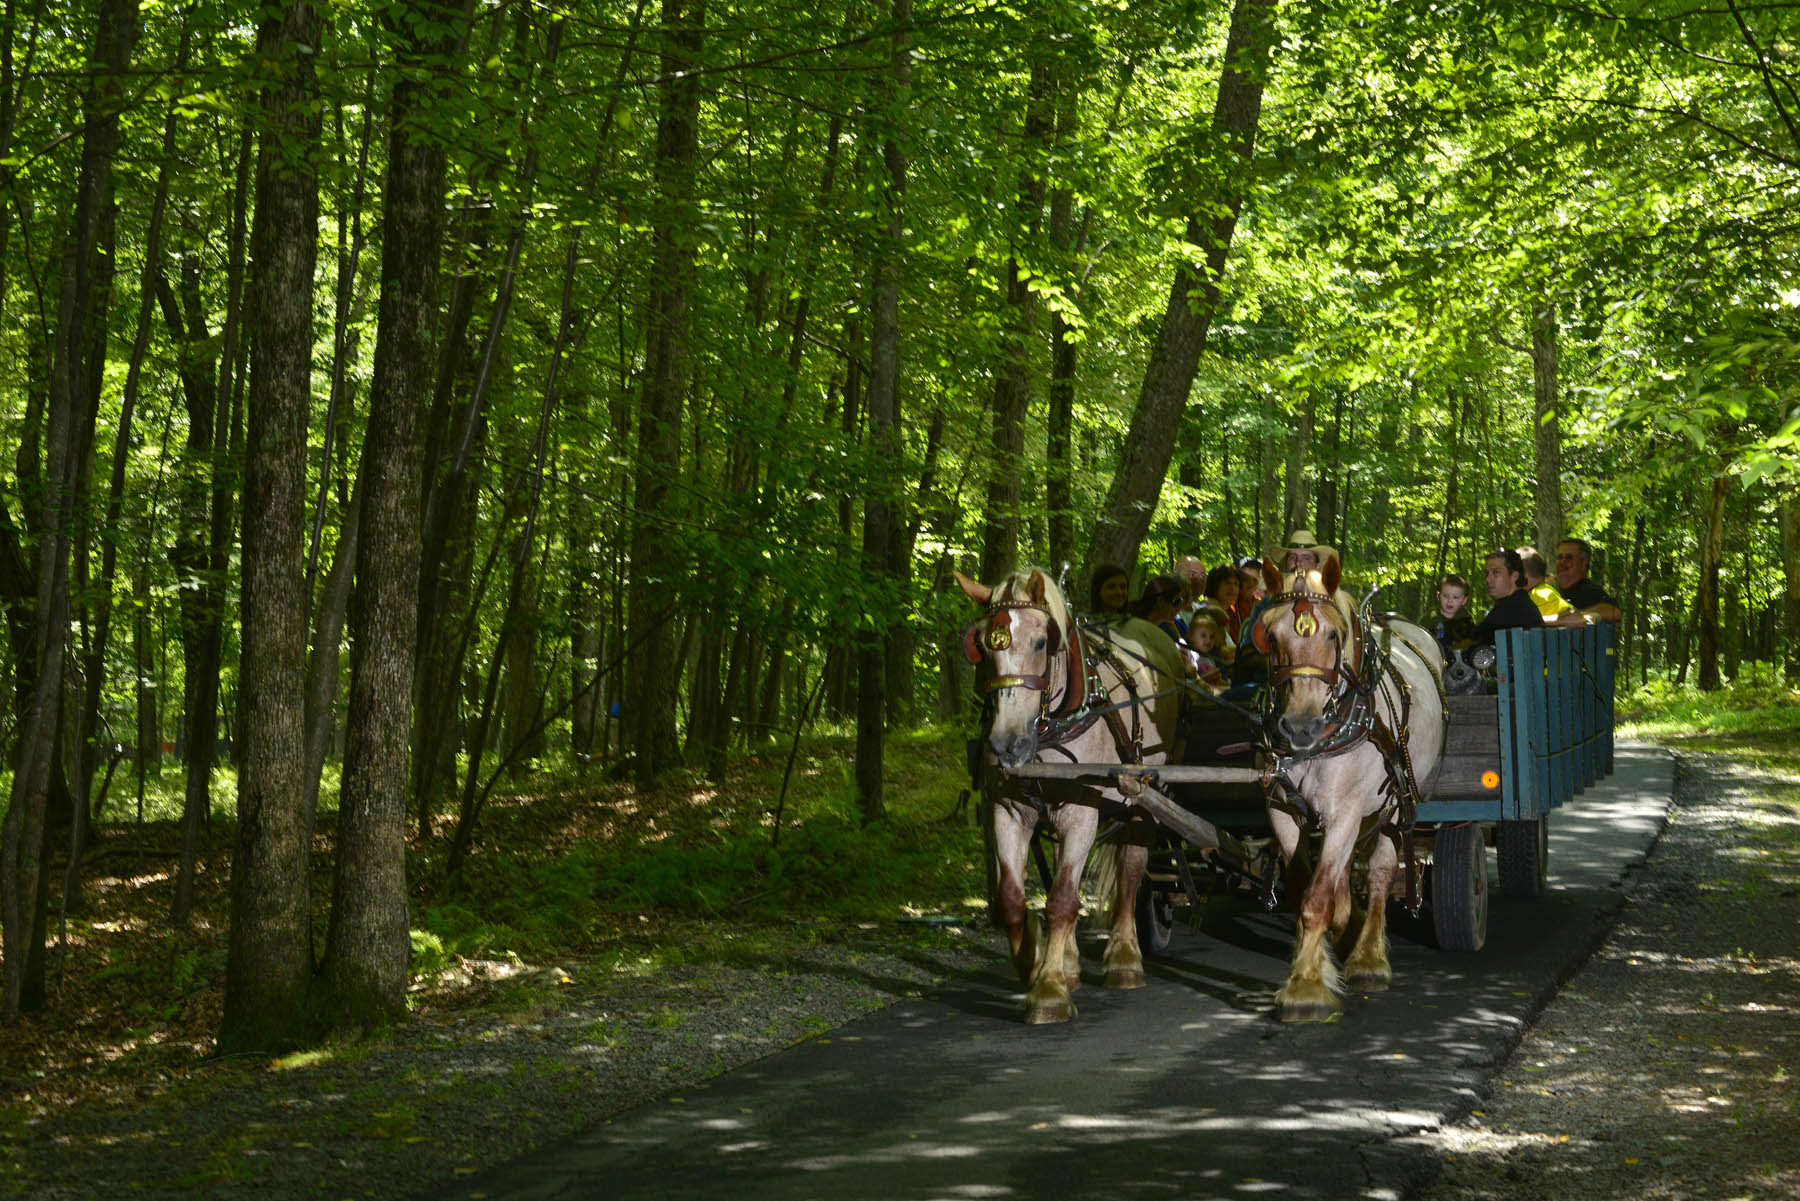 Group on horse-drawn trailer going through the woods in summer.